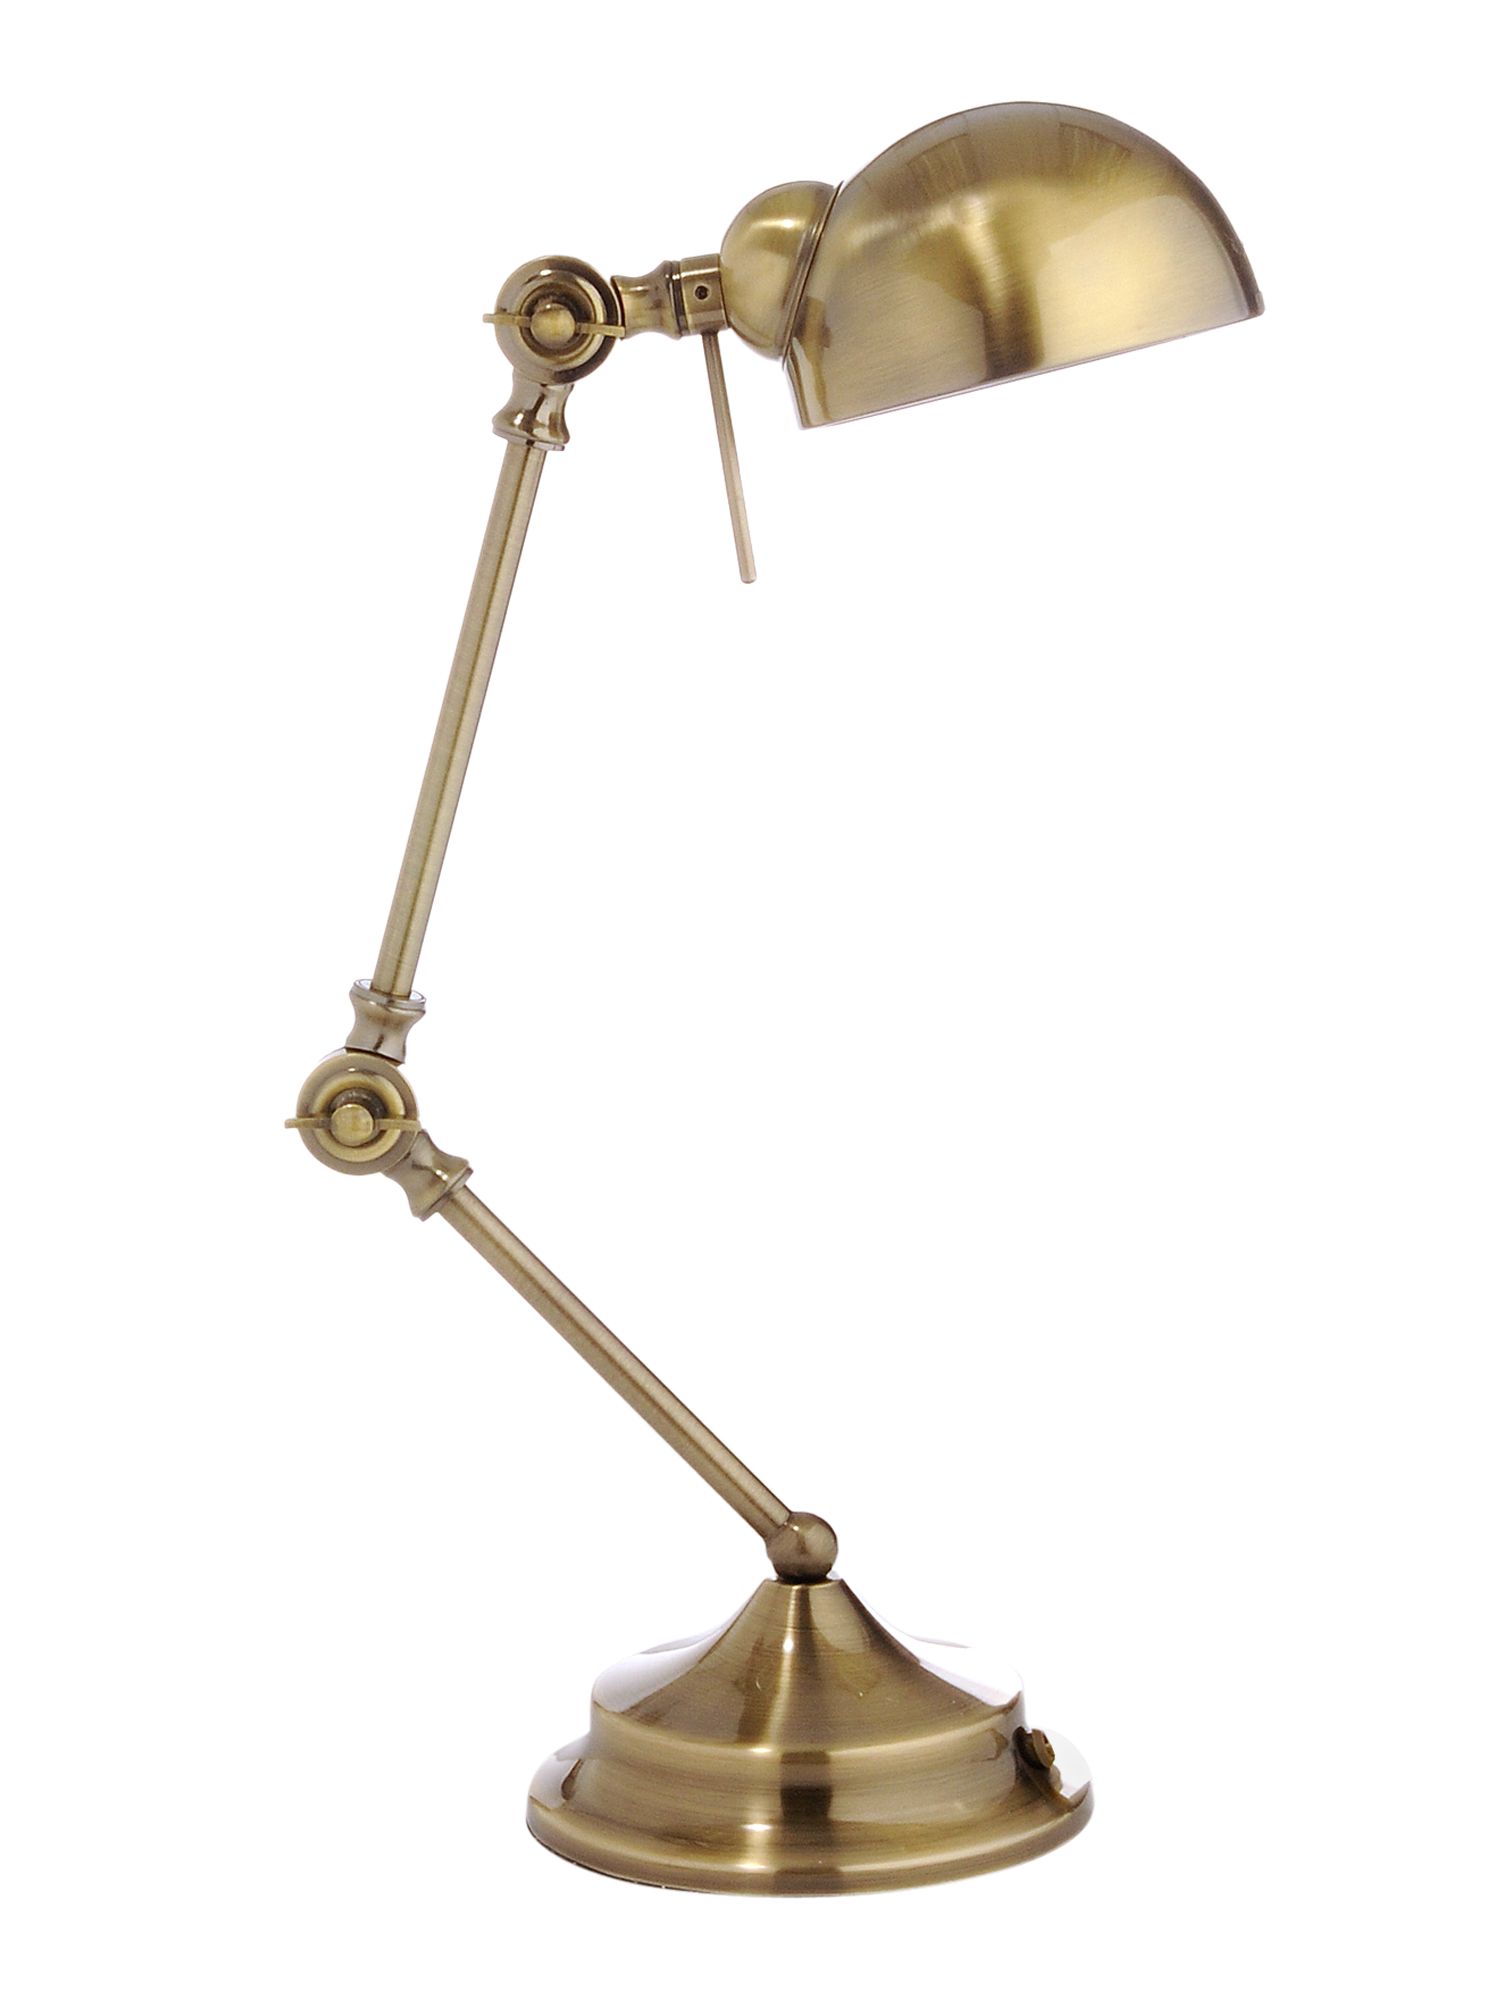 Antique brass desk lamp offers a dignified friendly look in the parlor